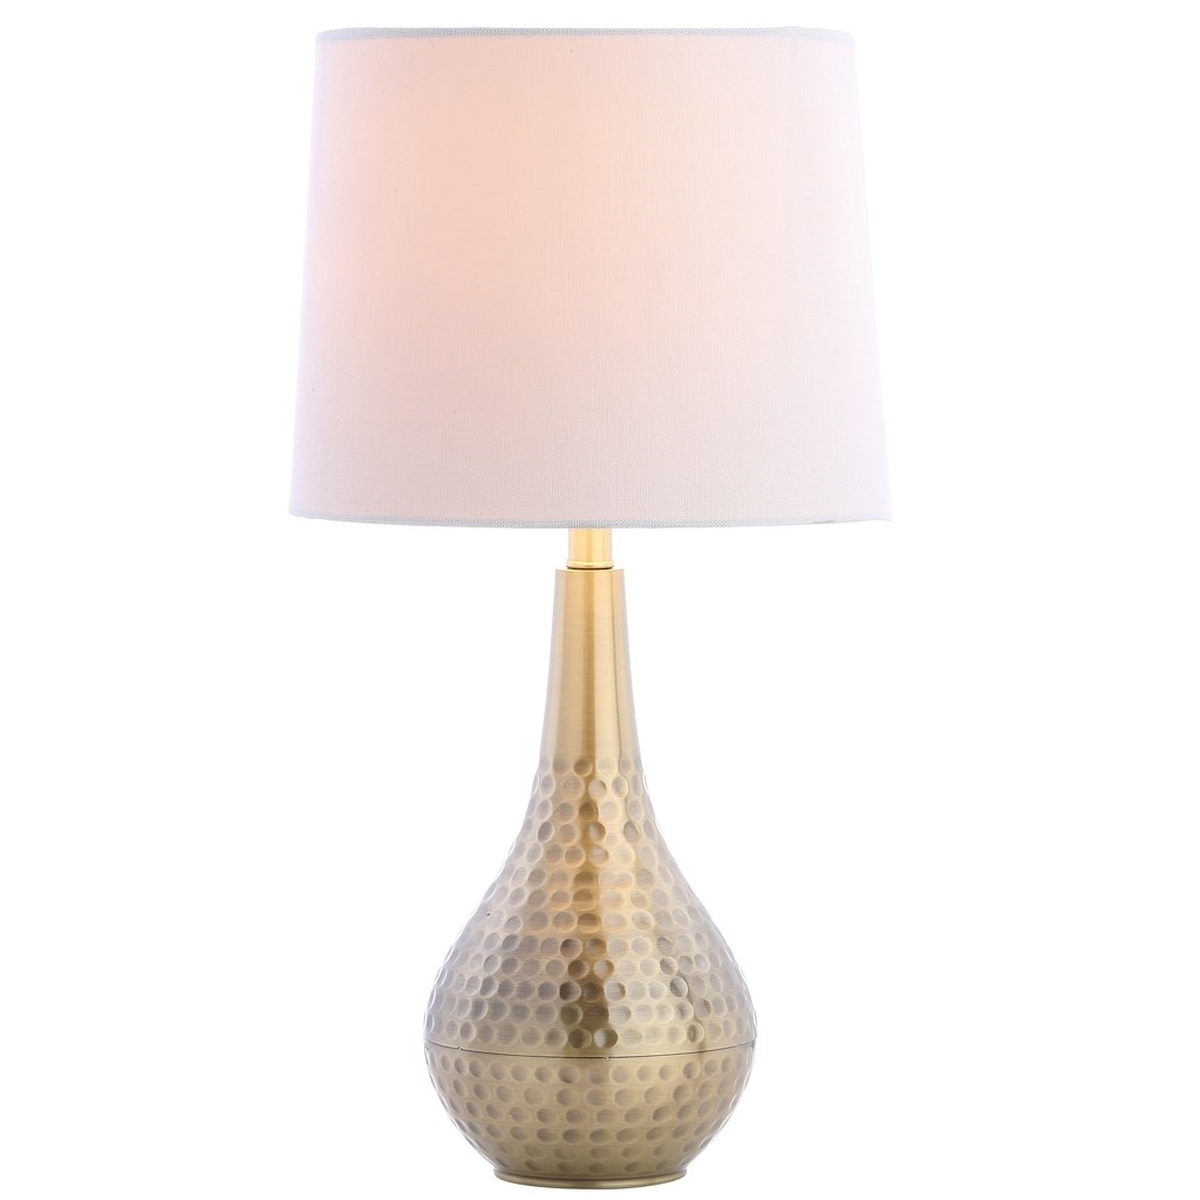 Medford Table Lamp - Brass Gold - Arlo Home - Image 1